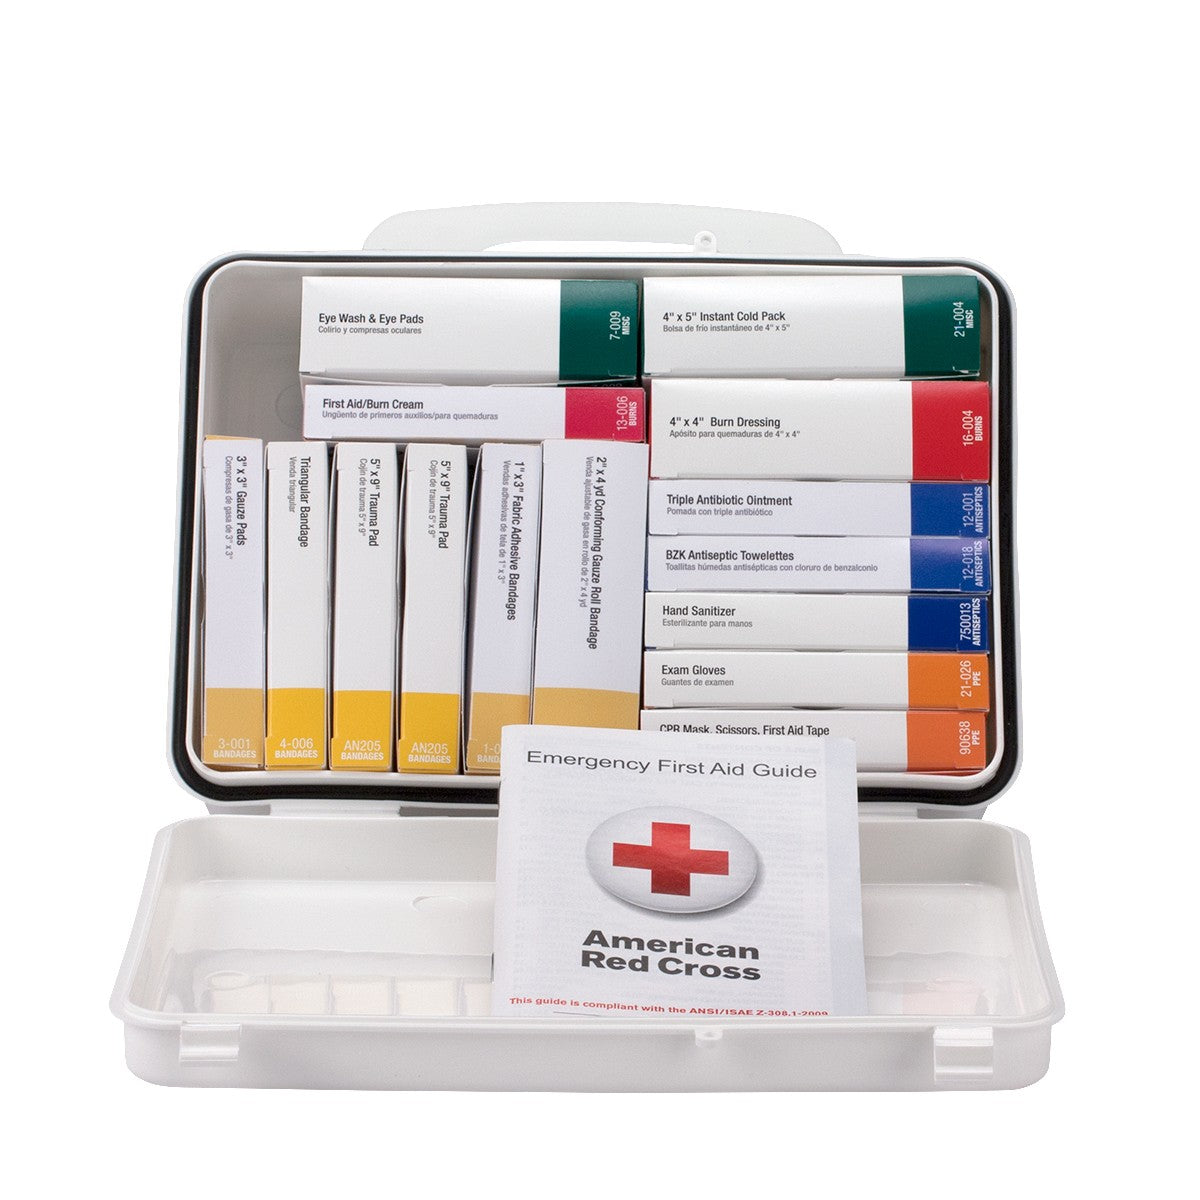 25 Person Unitized Plastic First Aid Kit, ANSI Compliant - W-90569